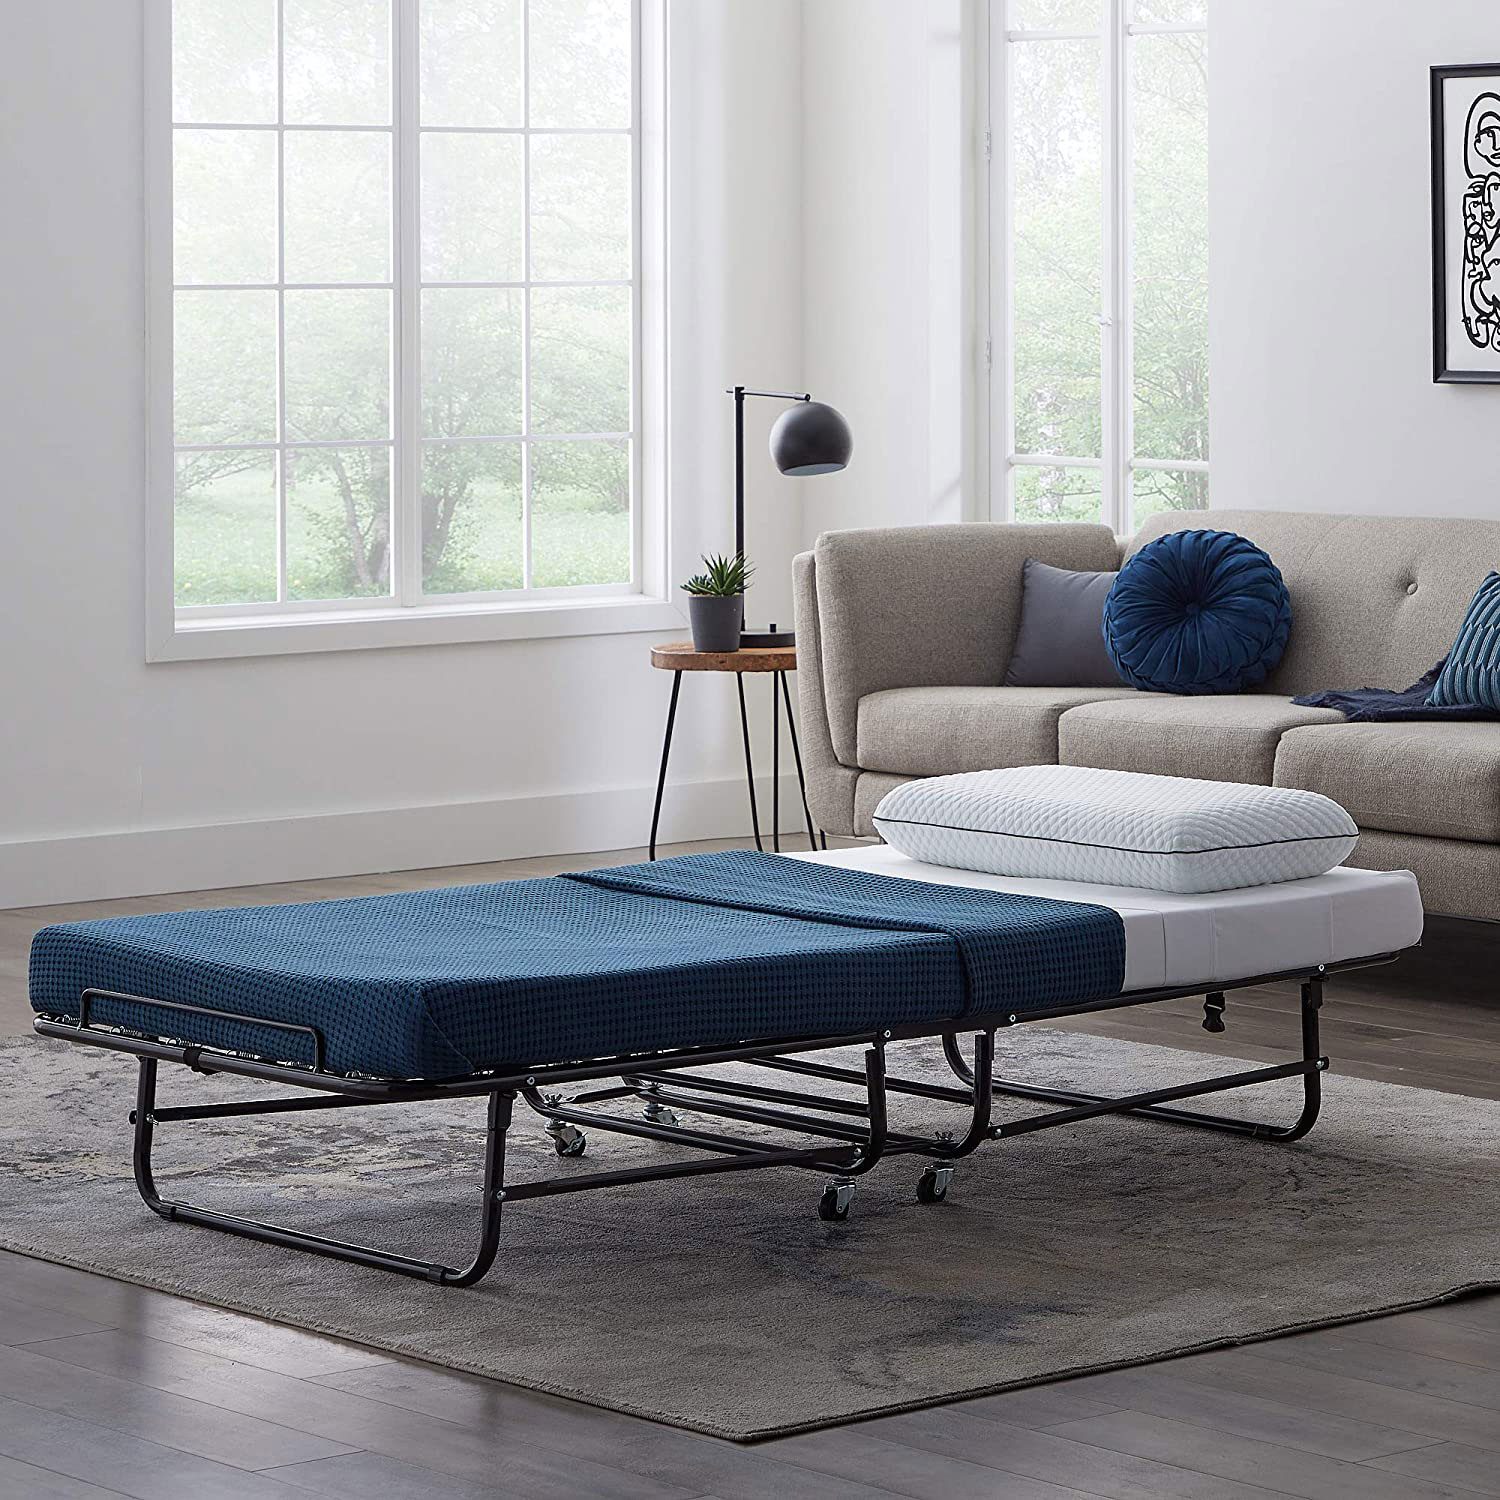 The Best Folding Beds For Hosting, Best Collapsible Bed Frame